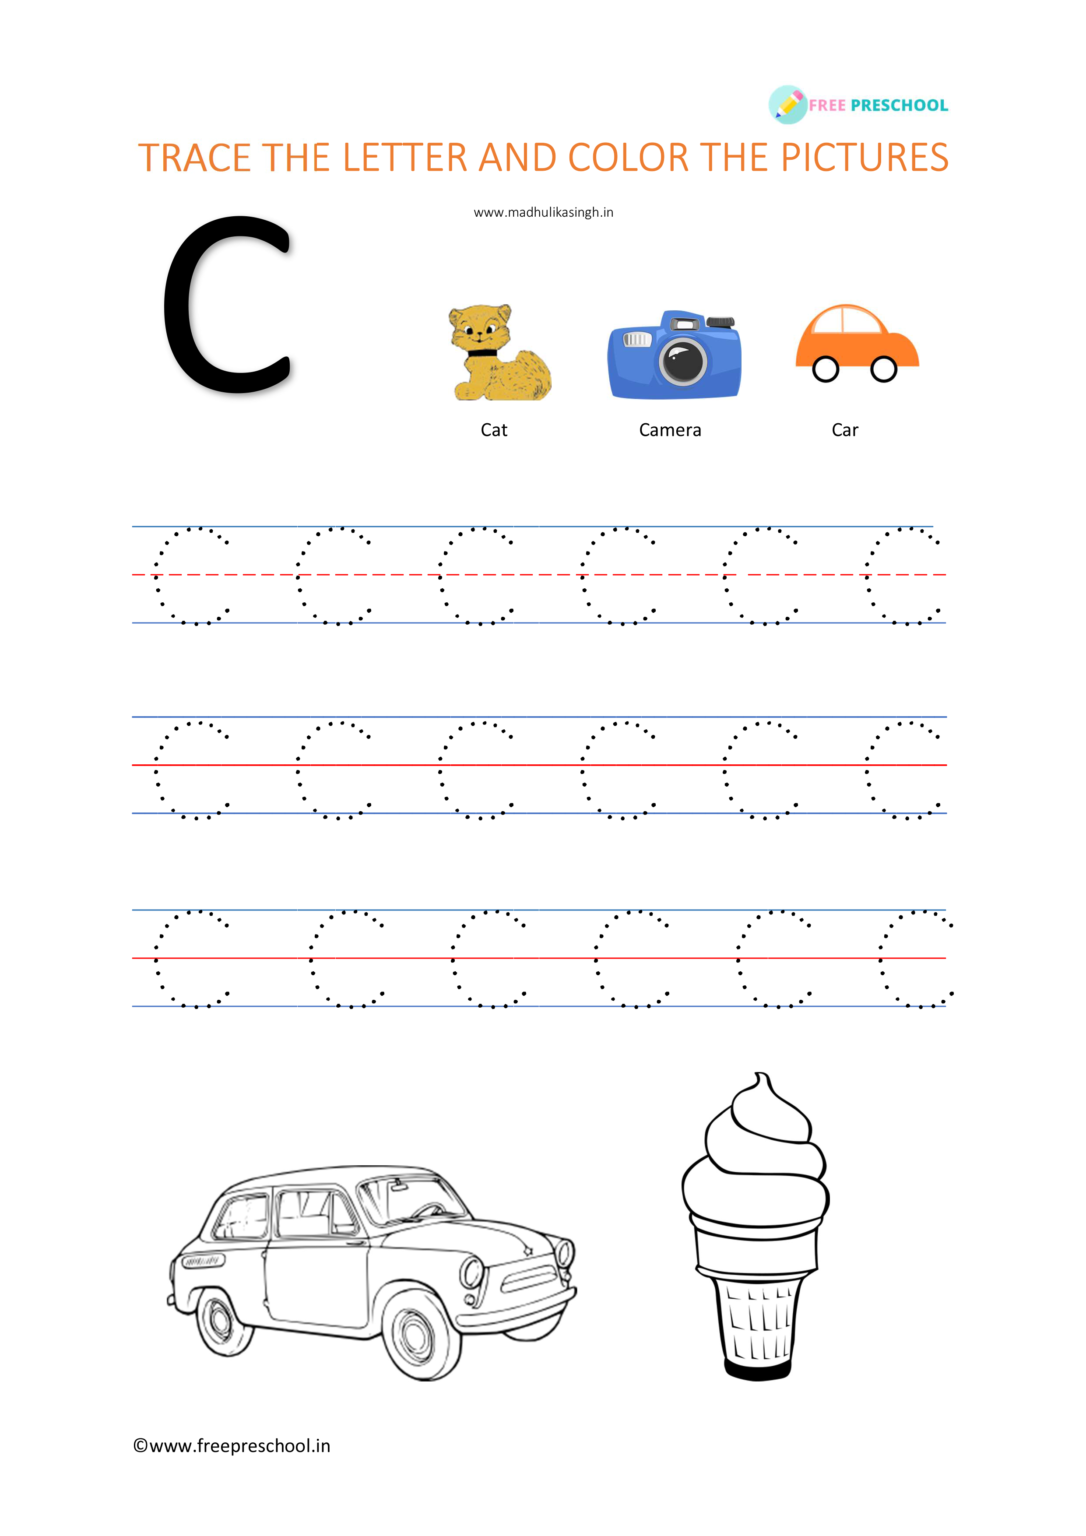 Alphabet tracing worksheets for preschool A to Z-156 pages - Free Preschool